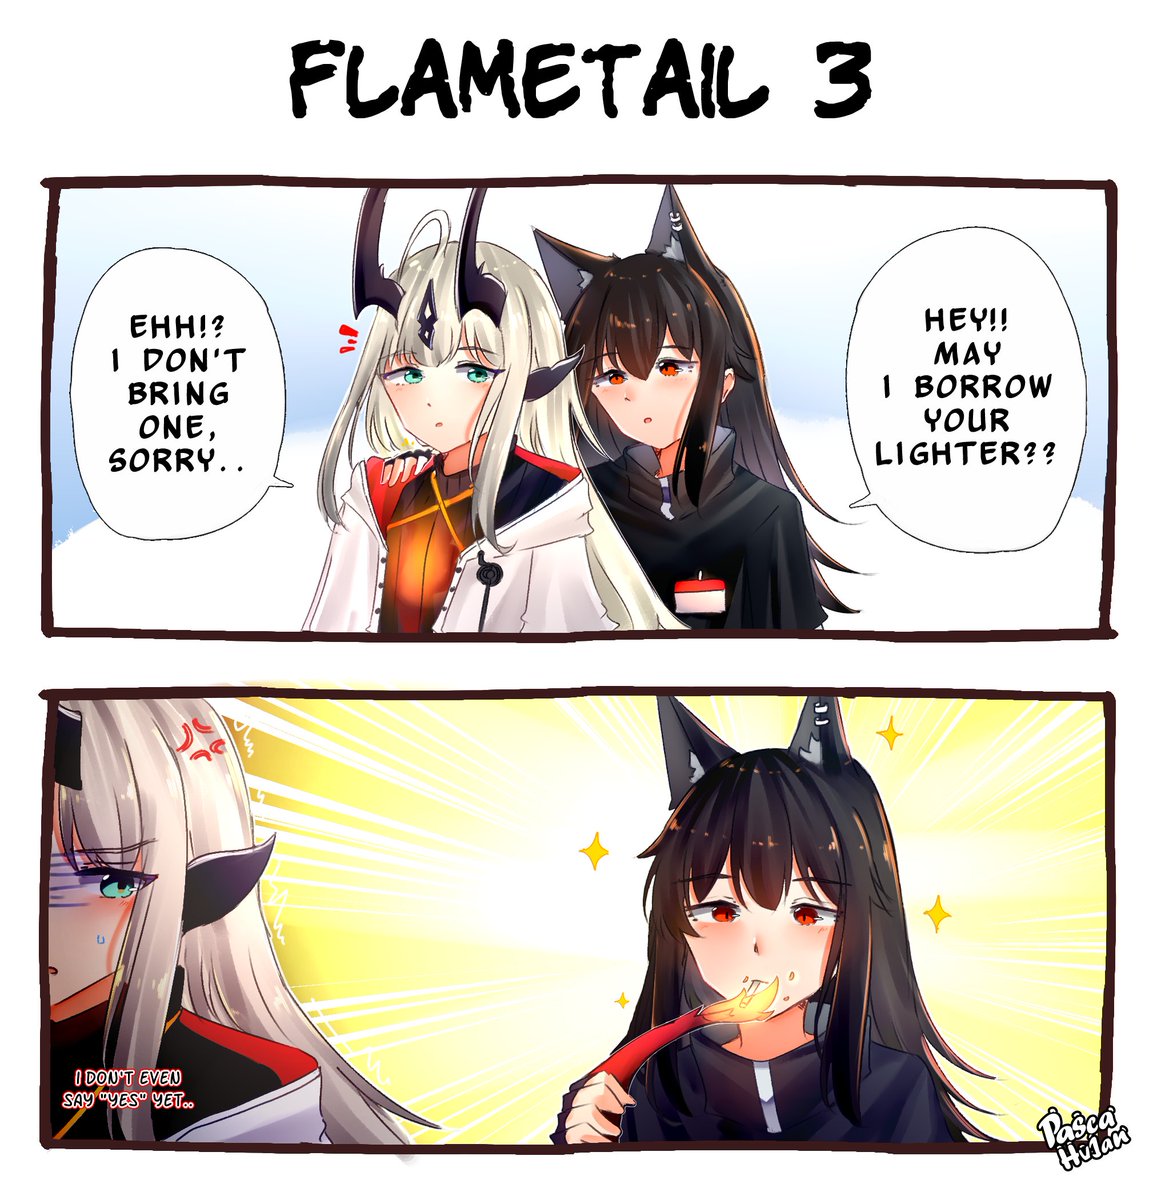 FLAMETAIL 3
---
#アークナイツ  #Arknights 